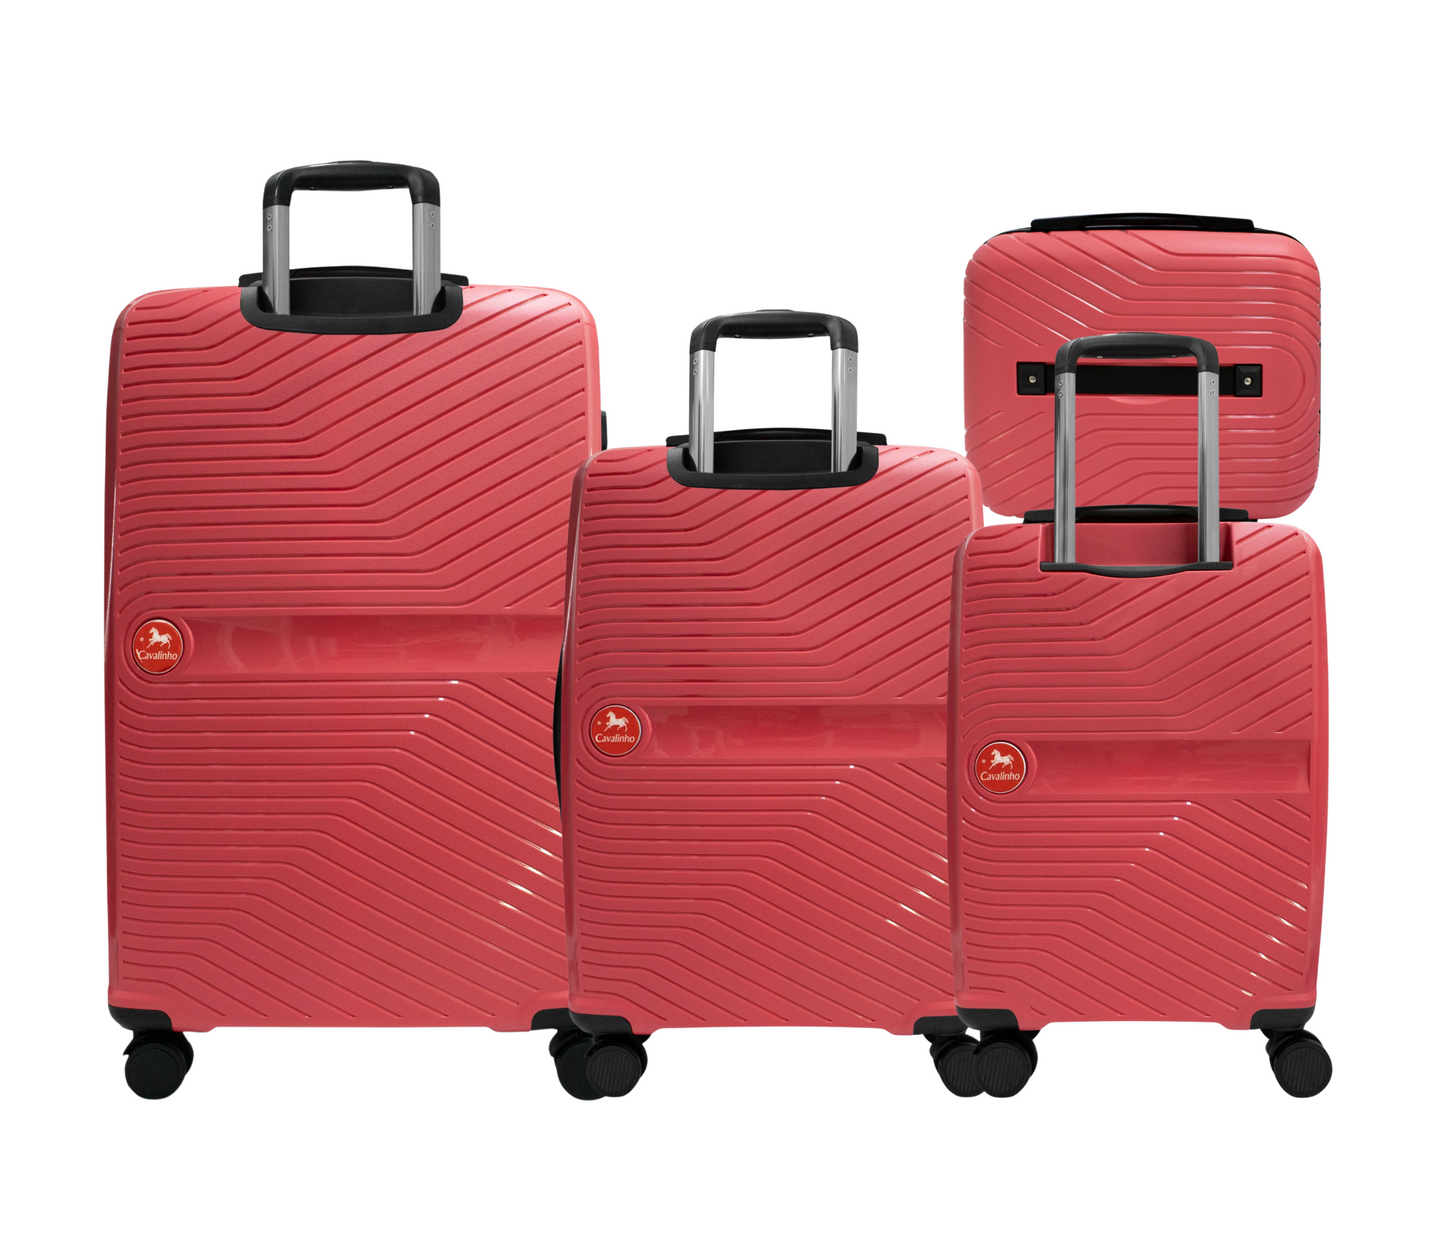 #color_ Coral | Cavalinho Canada & USA 4 Piece Set of Colorful Hardside Luggage (15", 19", 24", 28") - Coral - 68020004.27.S4_3